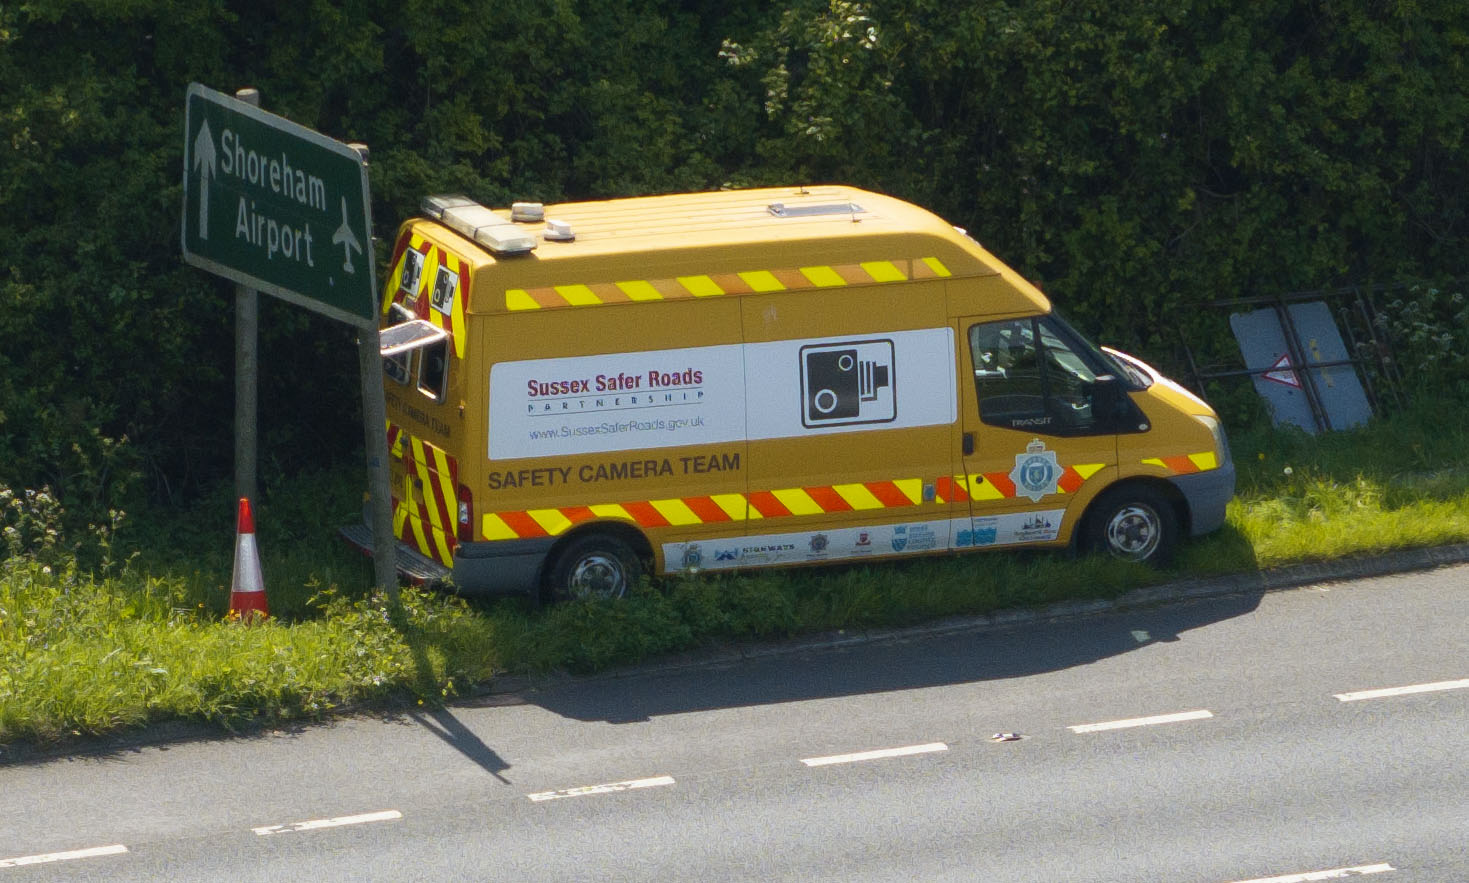 The van has been sneakily positioned directly behind a sign to catch people out